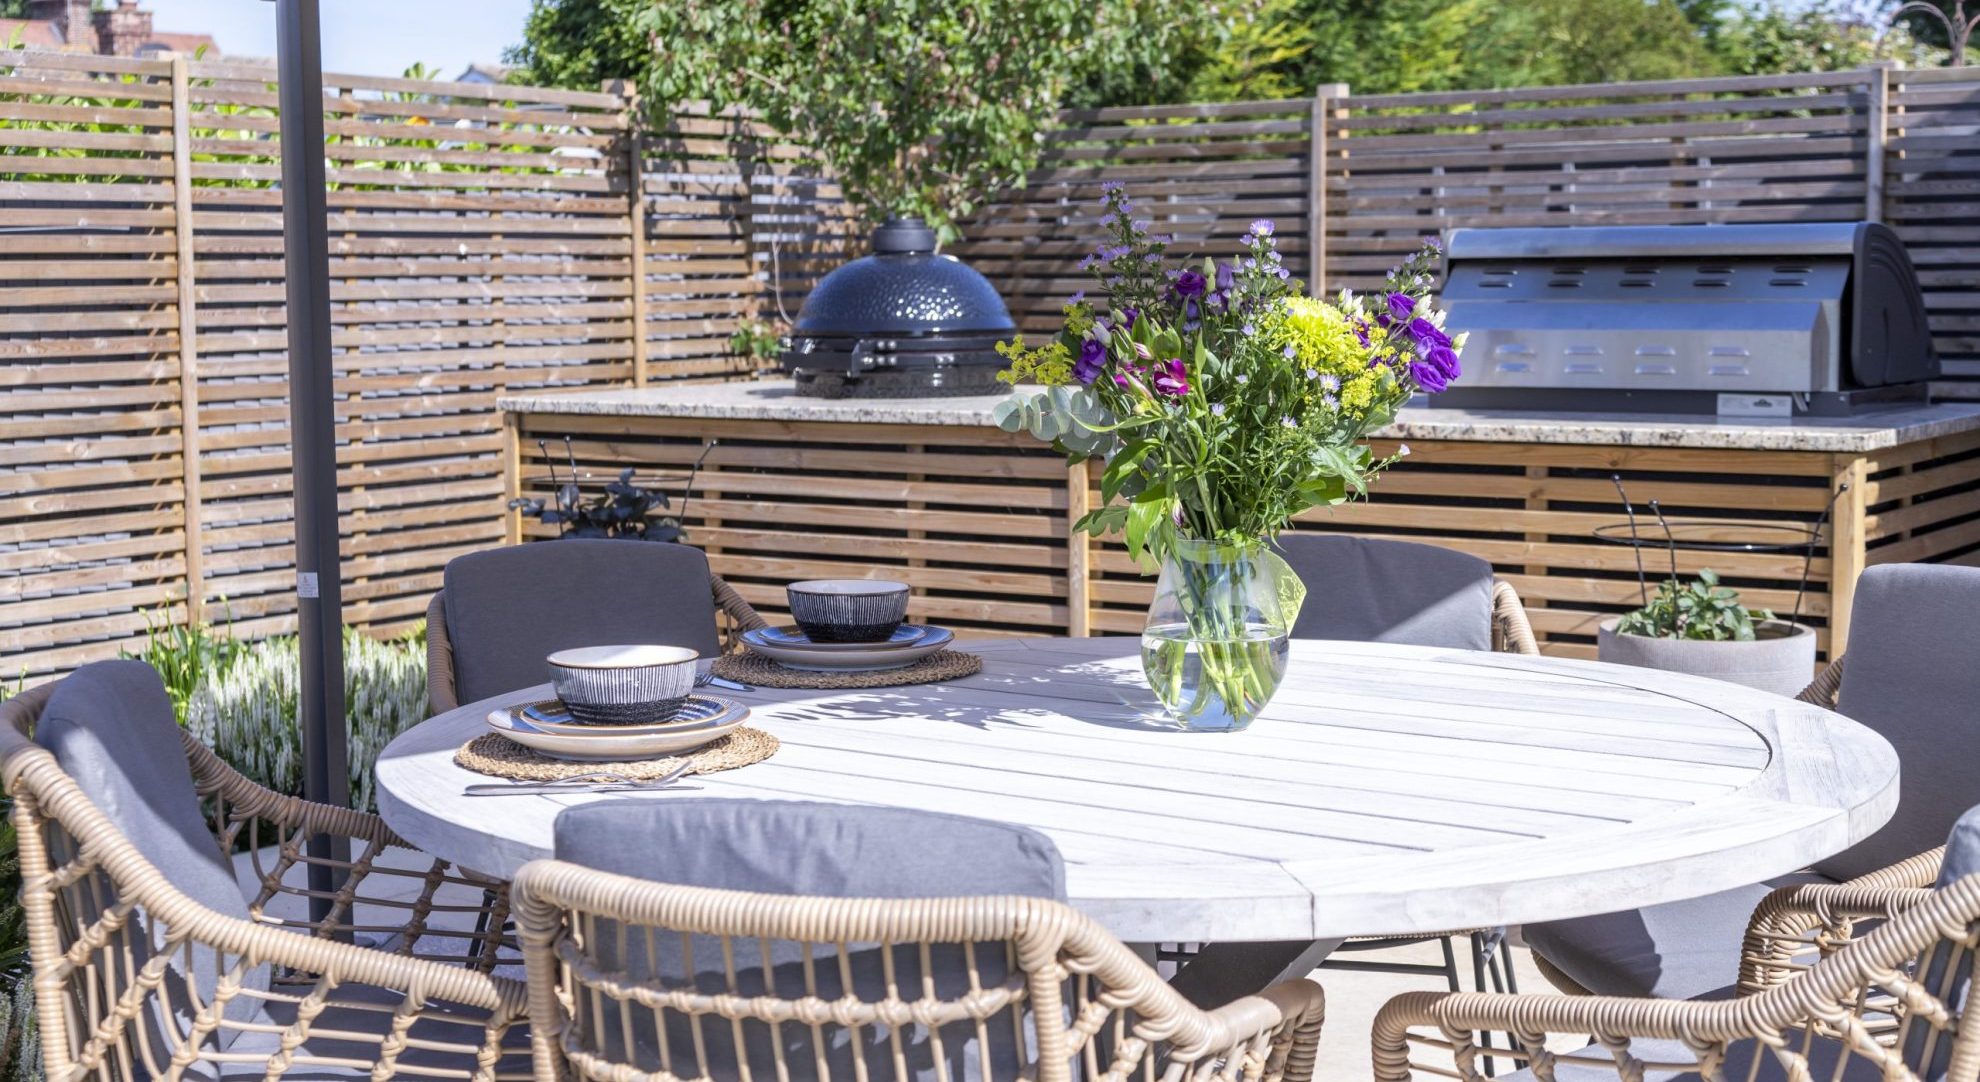 Outdoor Dining Area, Outdoor Kitchen BBQ and Egg, Slatted fencing.